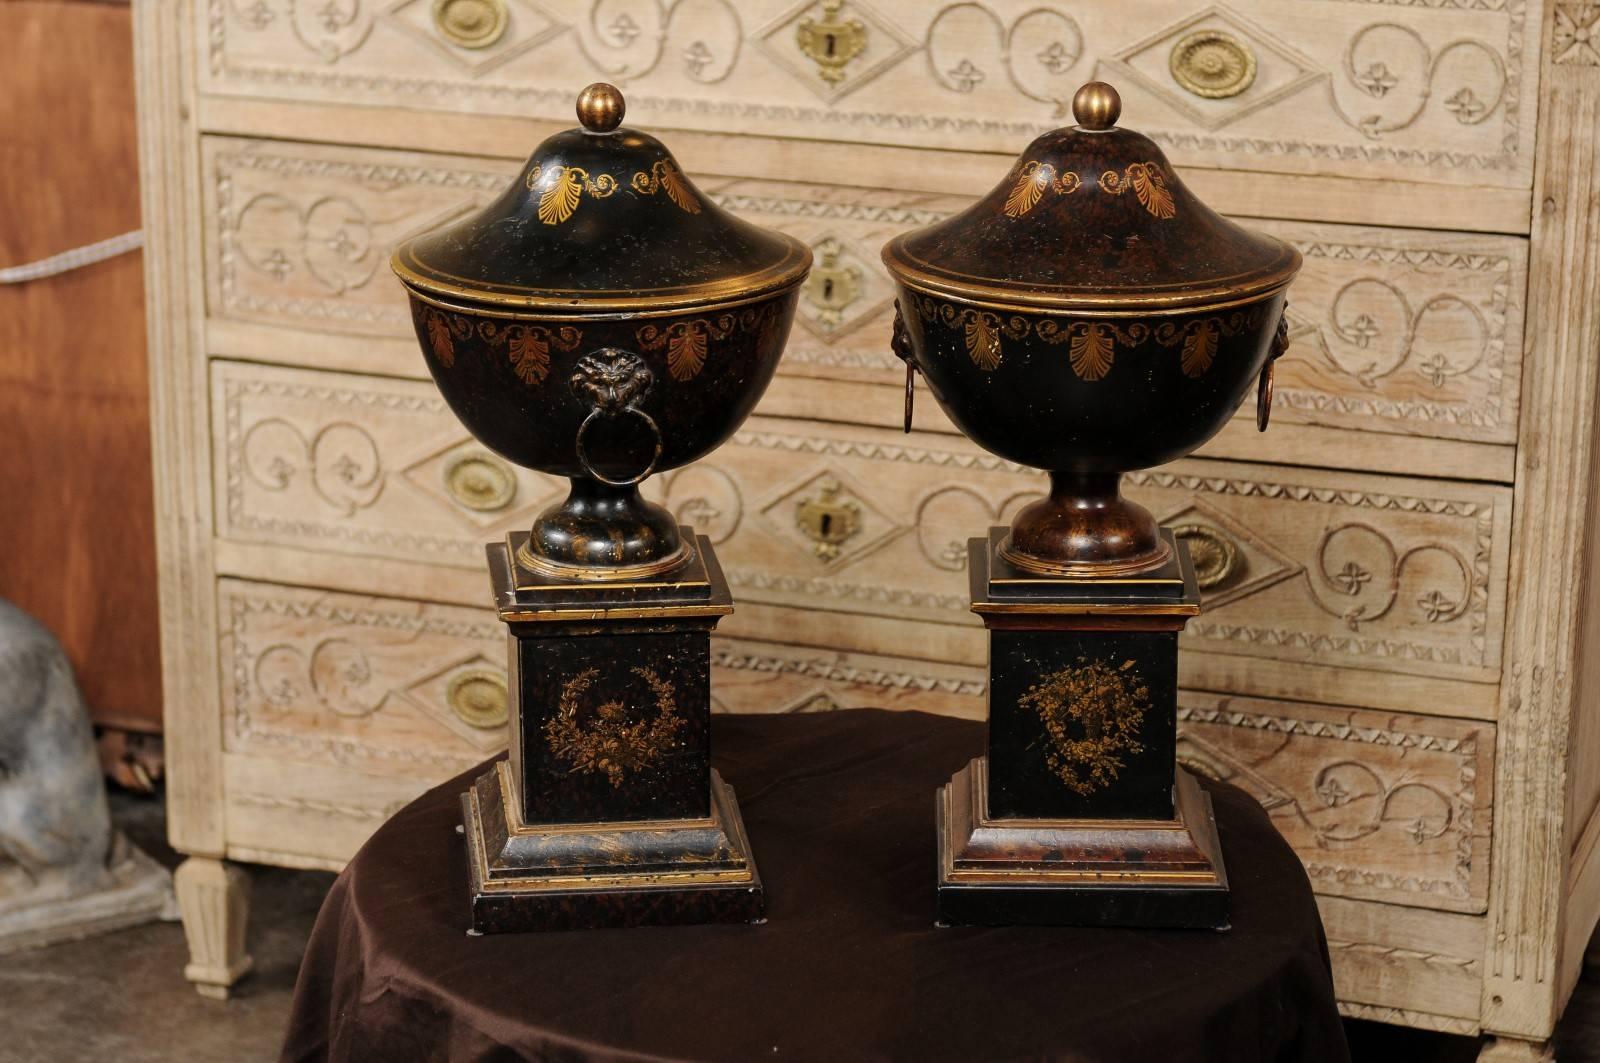 Tôle Pair of French 1920s Tole Black Tole Urns on Pedestals with Gilded Accents